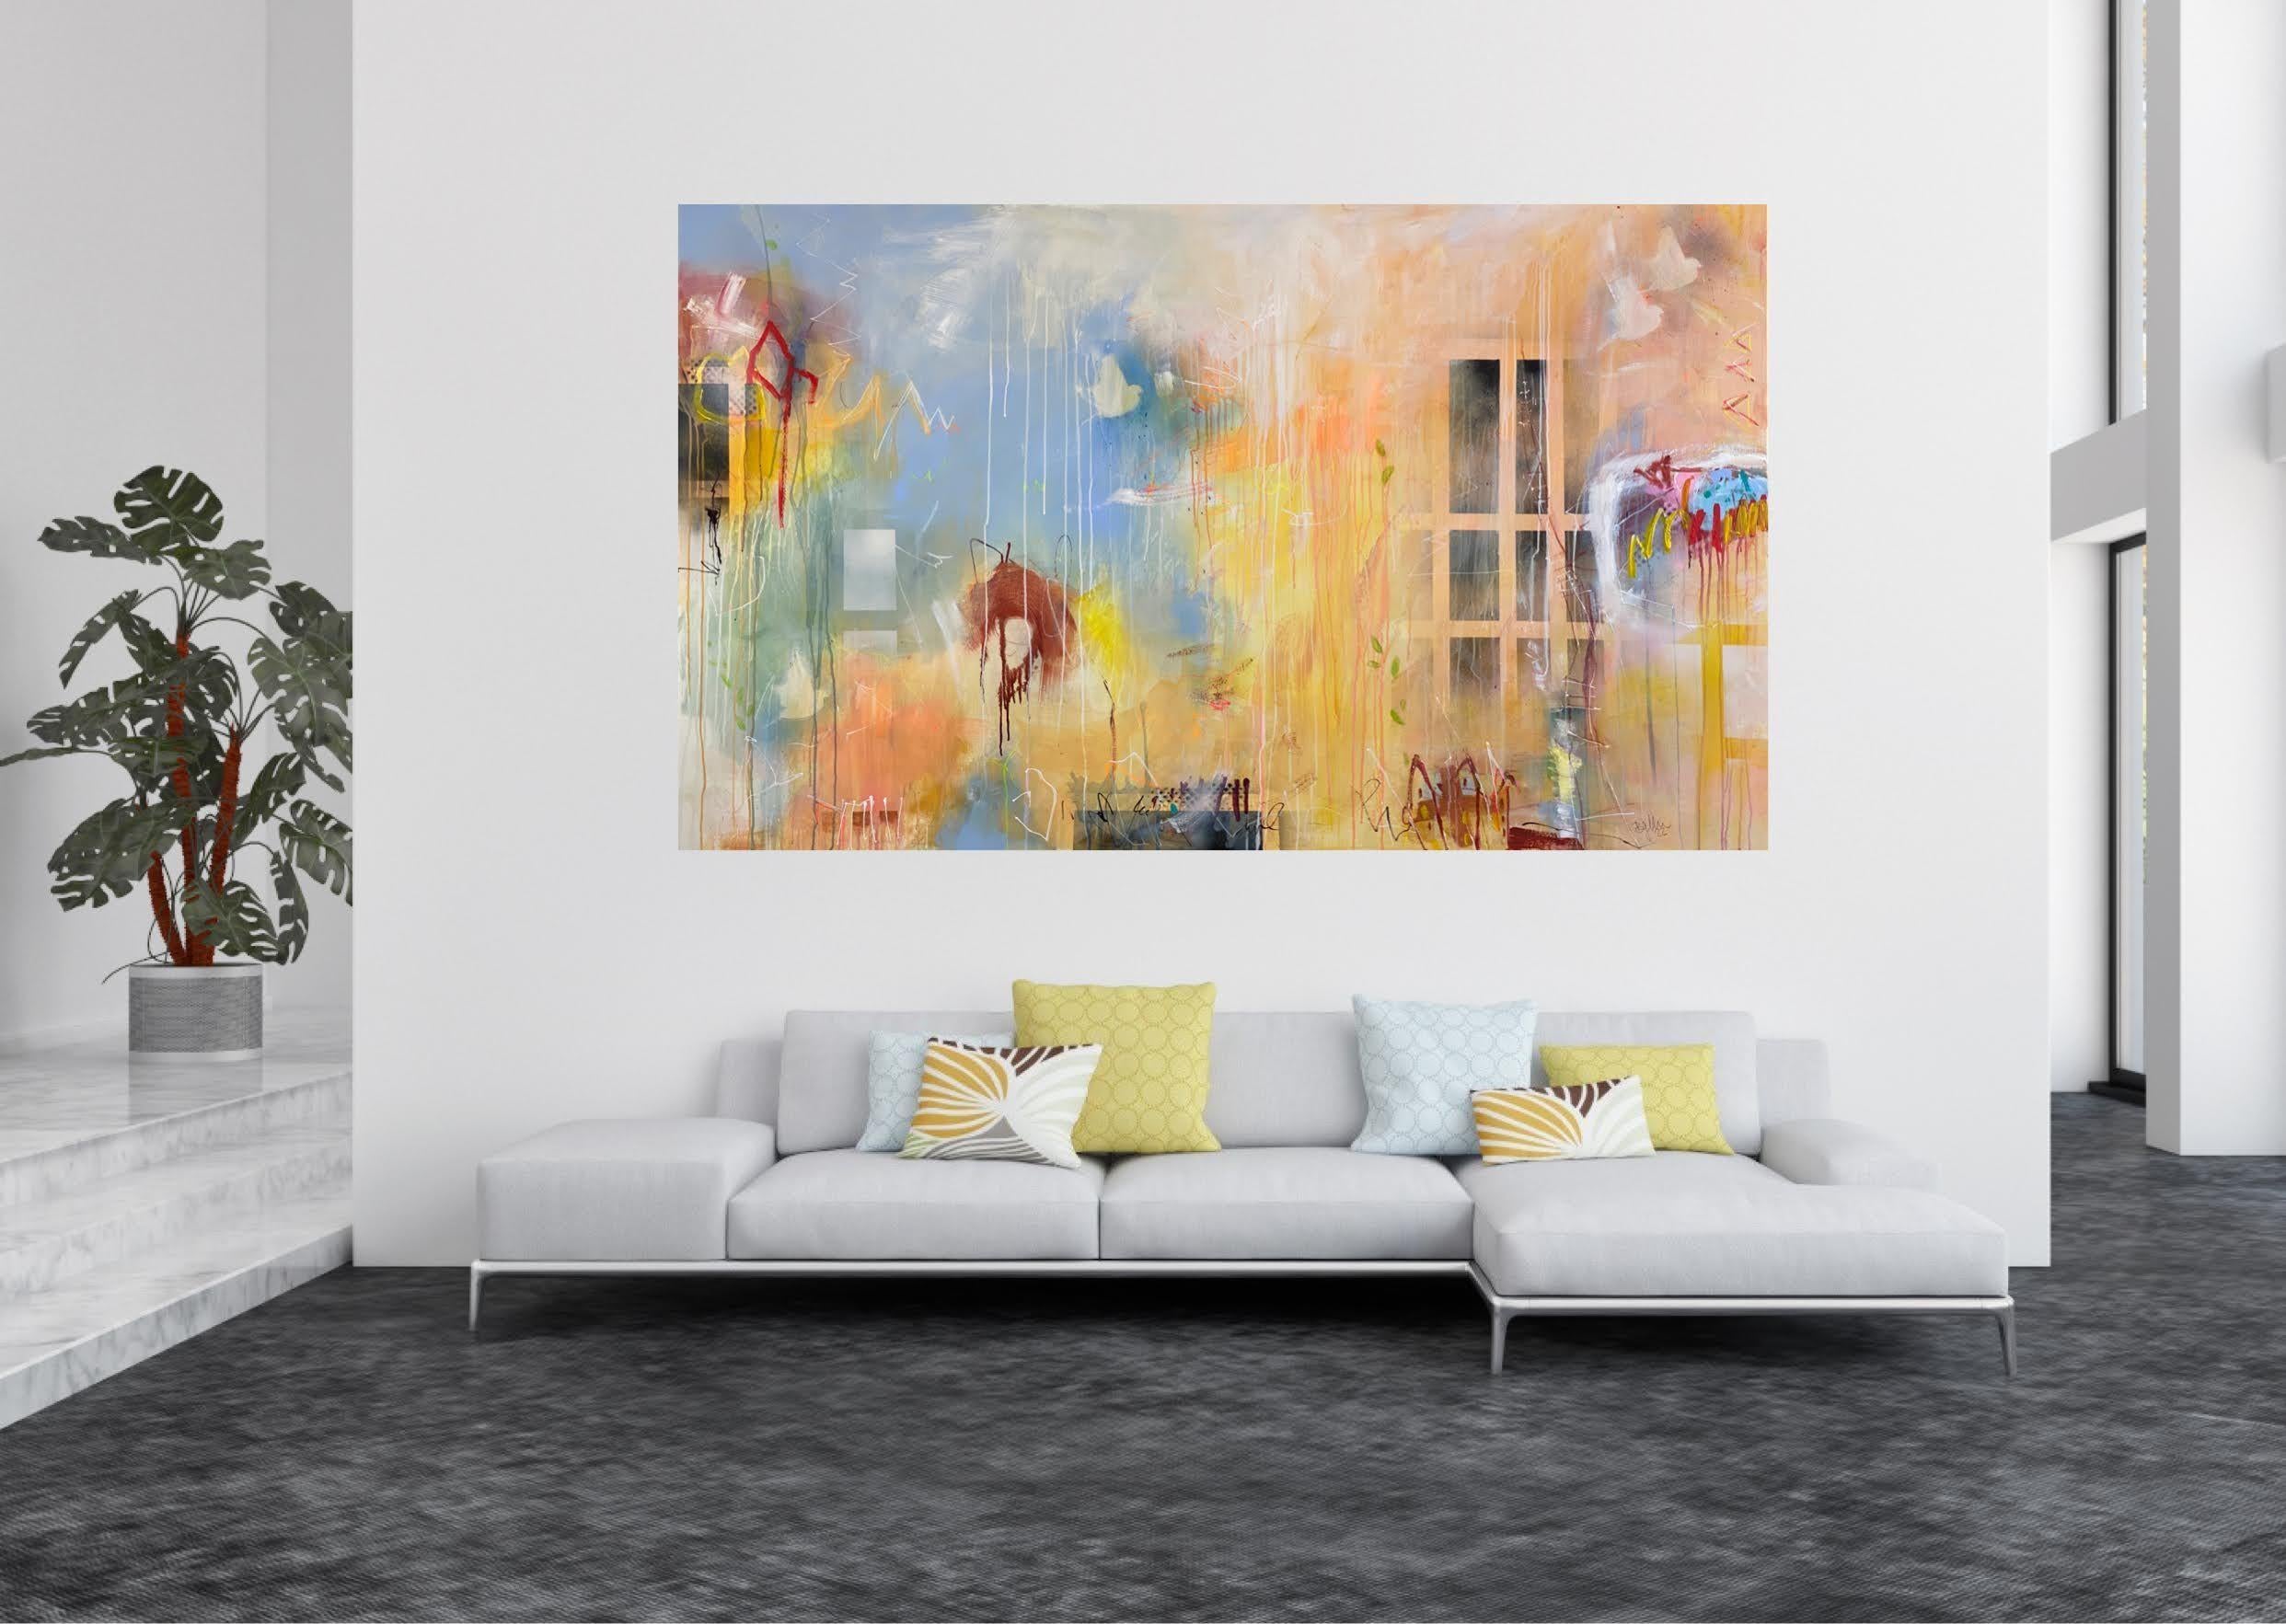 Acrylic, ink, neon pastels, Spray Paint, pastels, on Canvas.  Flying Home No.1 is a 200 cm/78,7 in W x 120 cm/47,24 H in, 2,5 cm/1 in deep mixed media painting. Fine layers create a mystical atmospere.  This Series is called â€žHomeâ€œ. Home is